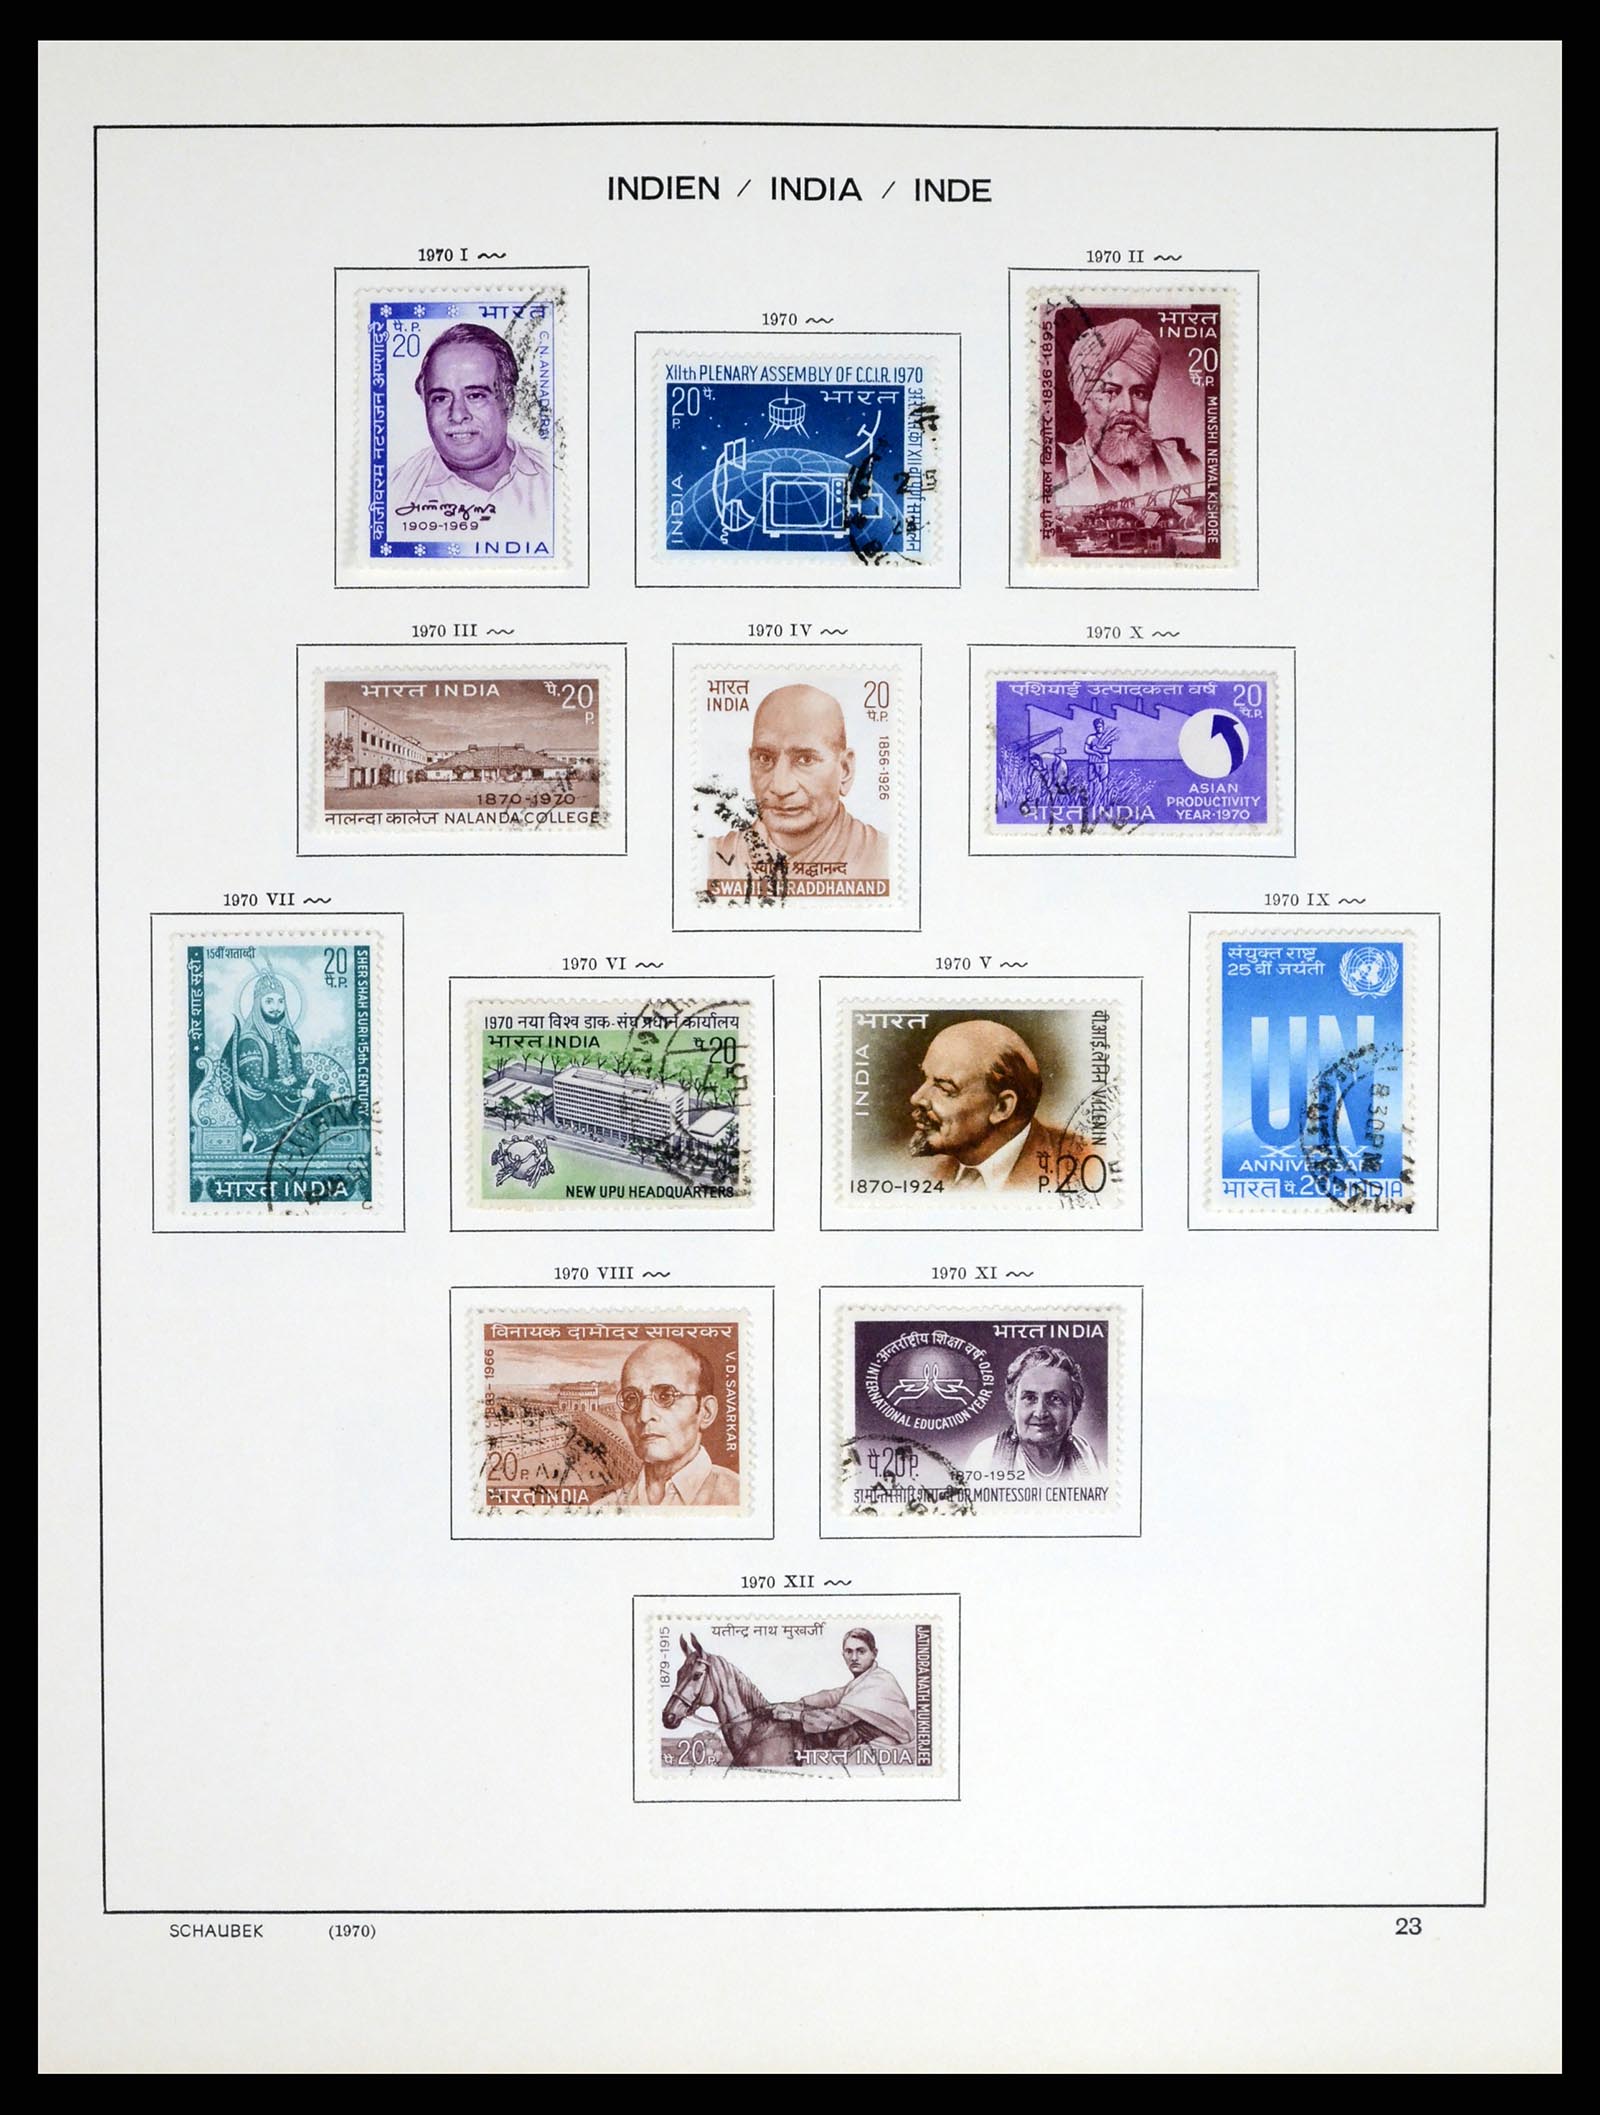 37304 029 - Stamp collection 37304 India 1947-2016.